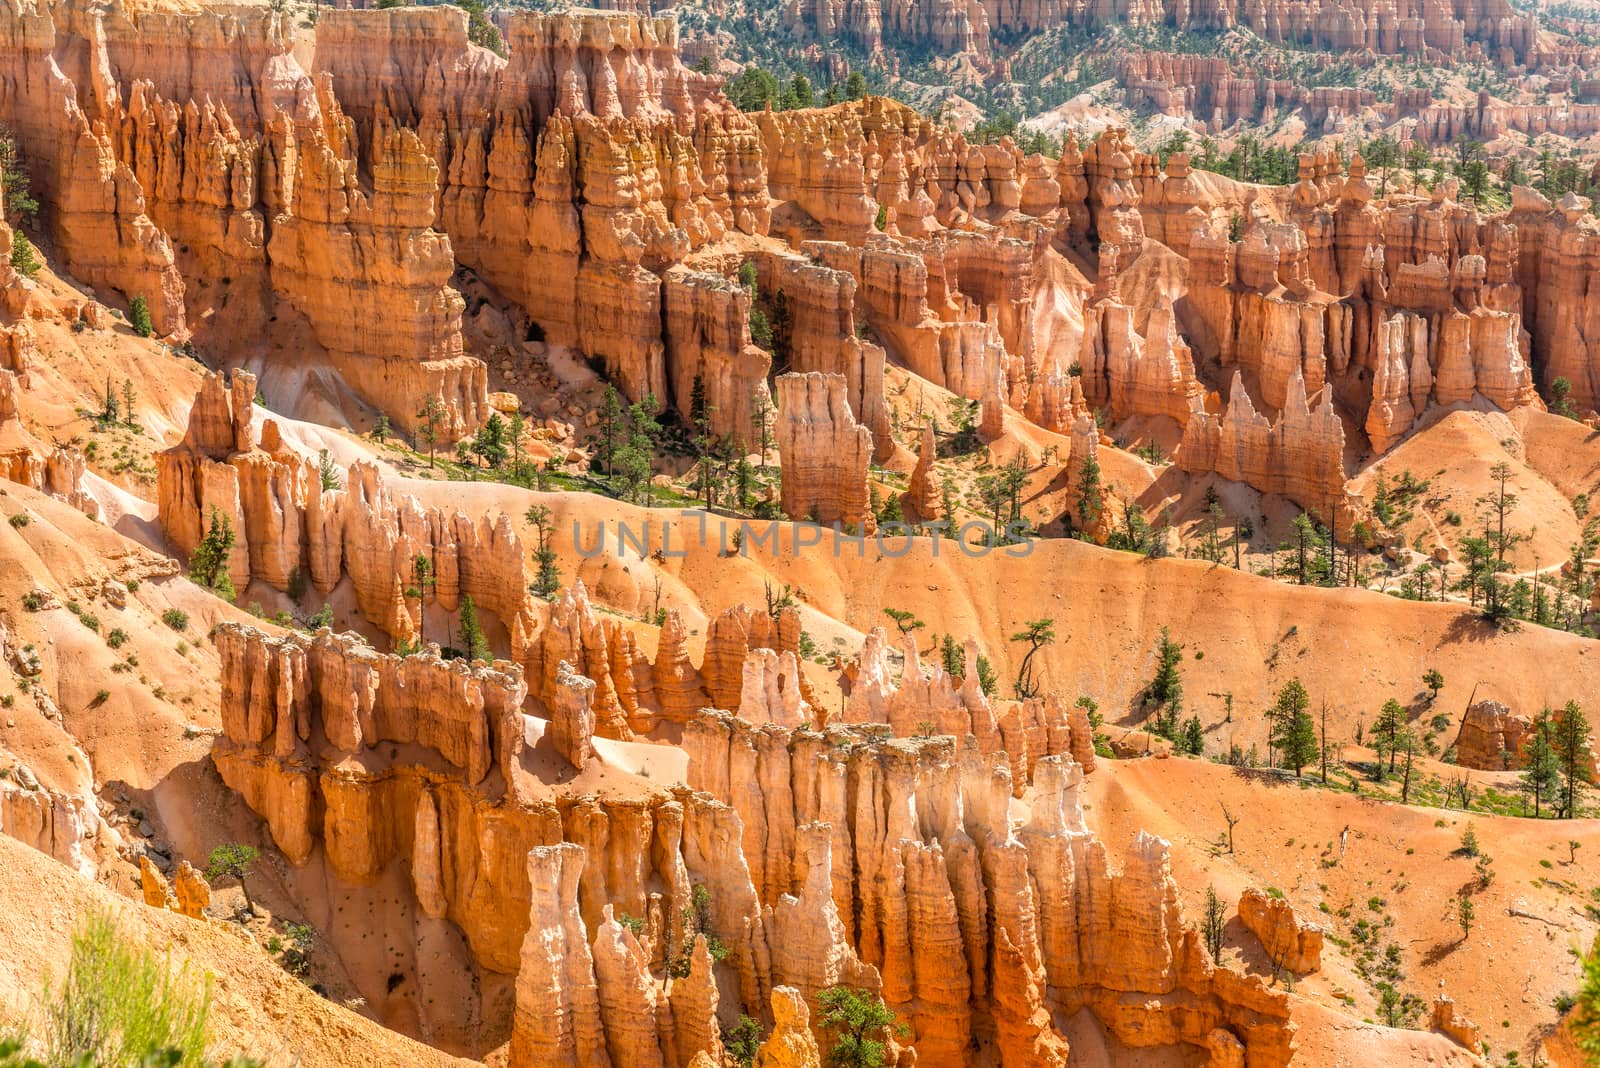 View of Bryce Amphitheater from Sunrise Point of Bryce Canyon National Park, Utah